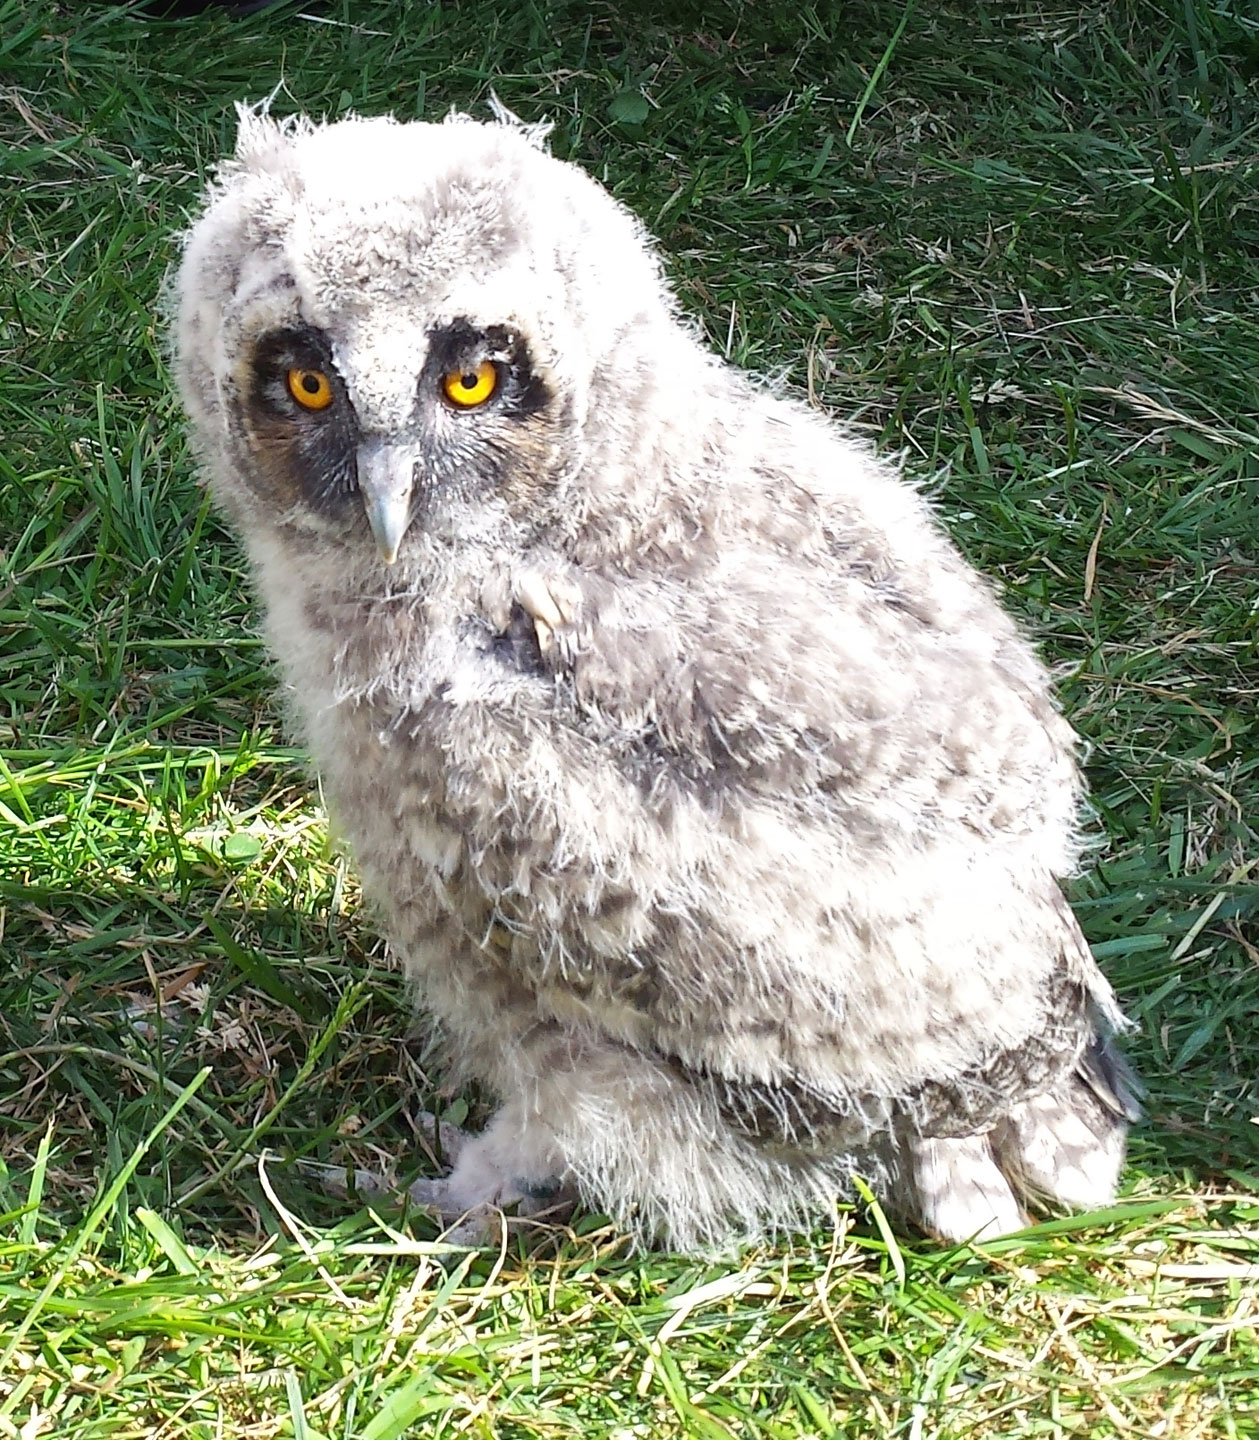 A short-eared Owl Chick pictured on grass